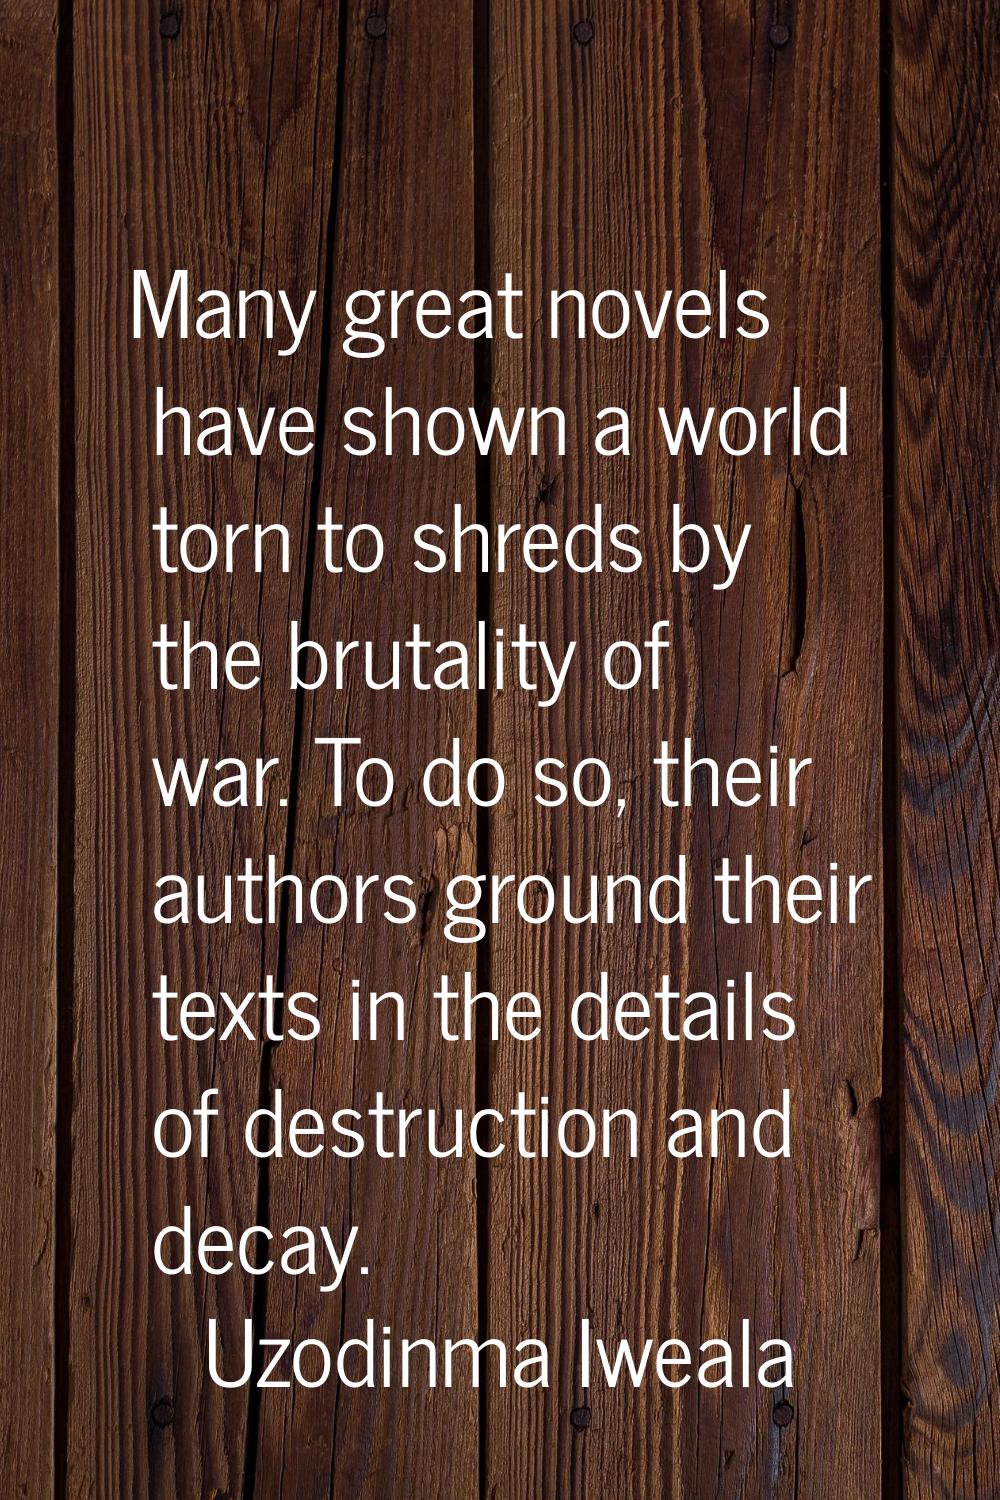 Many great novels have shown a world torn to shreds by the brutality of war. To do so, their author